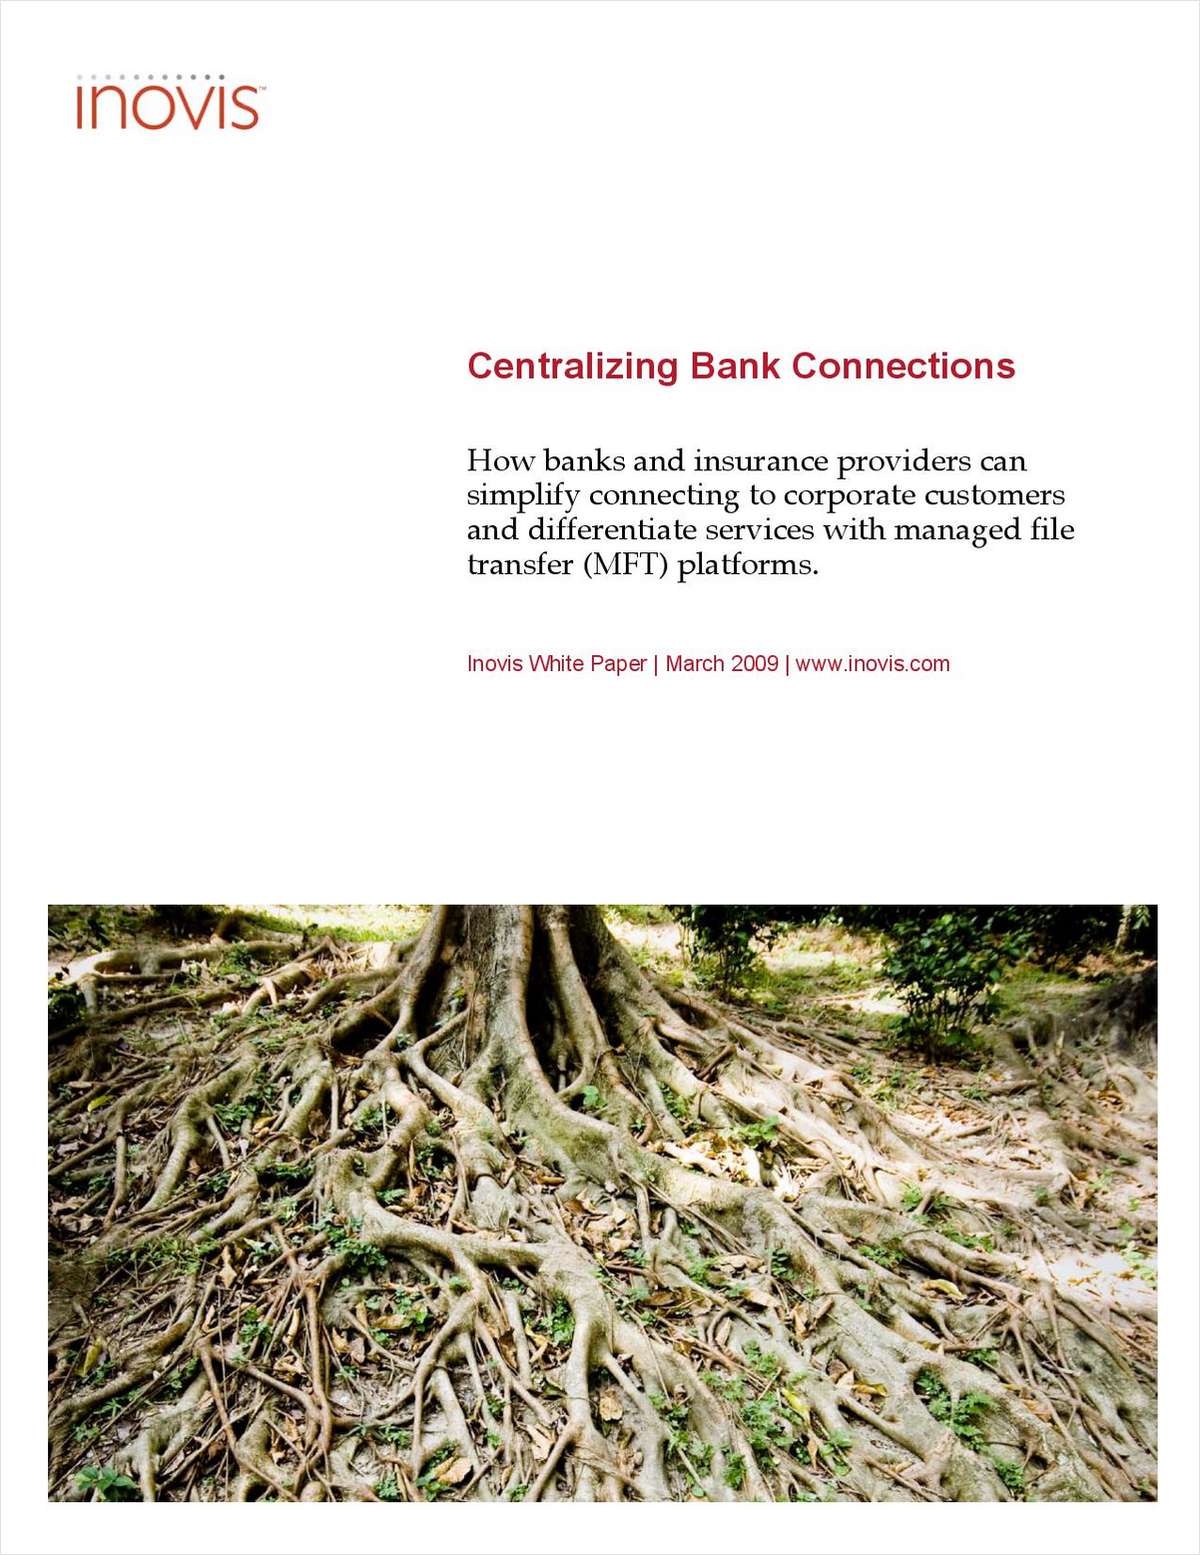 A New Approach to Centralizing Bank Connections